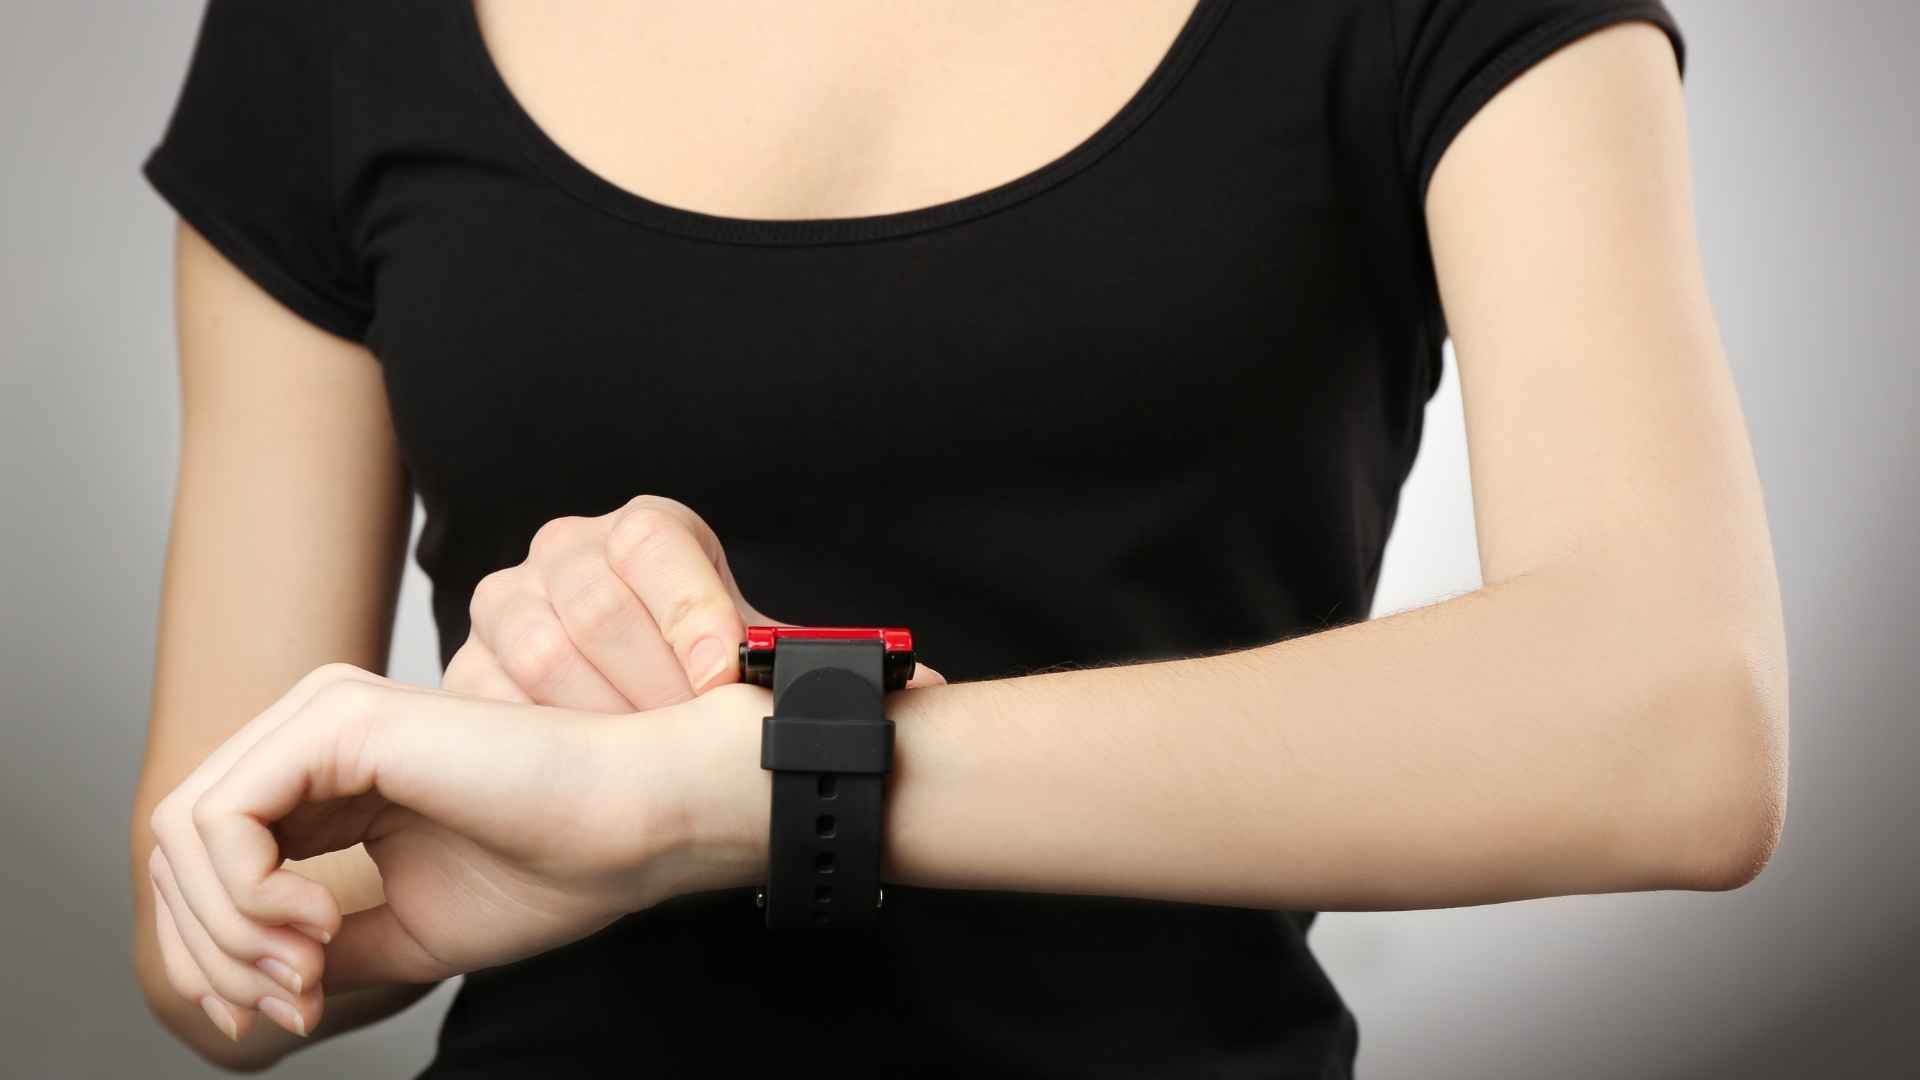 How to Use Heart Rate Monitors to Help You